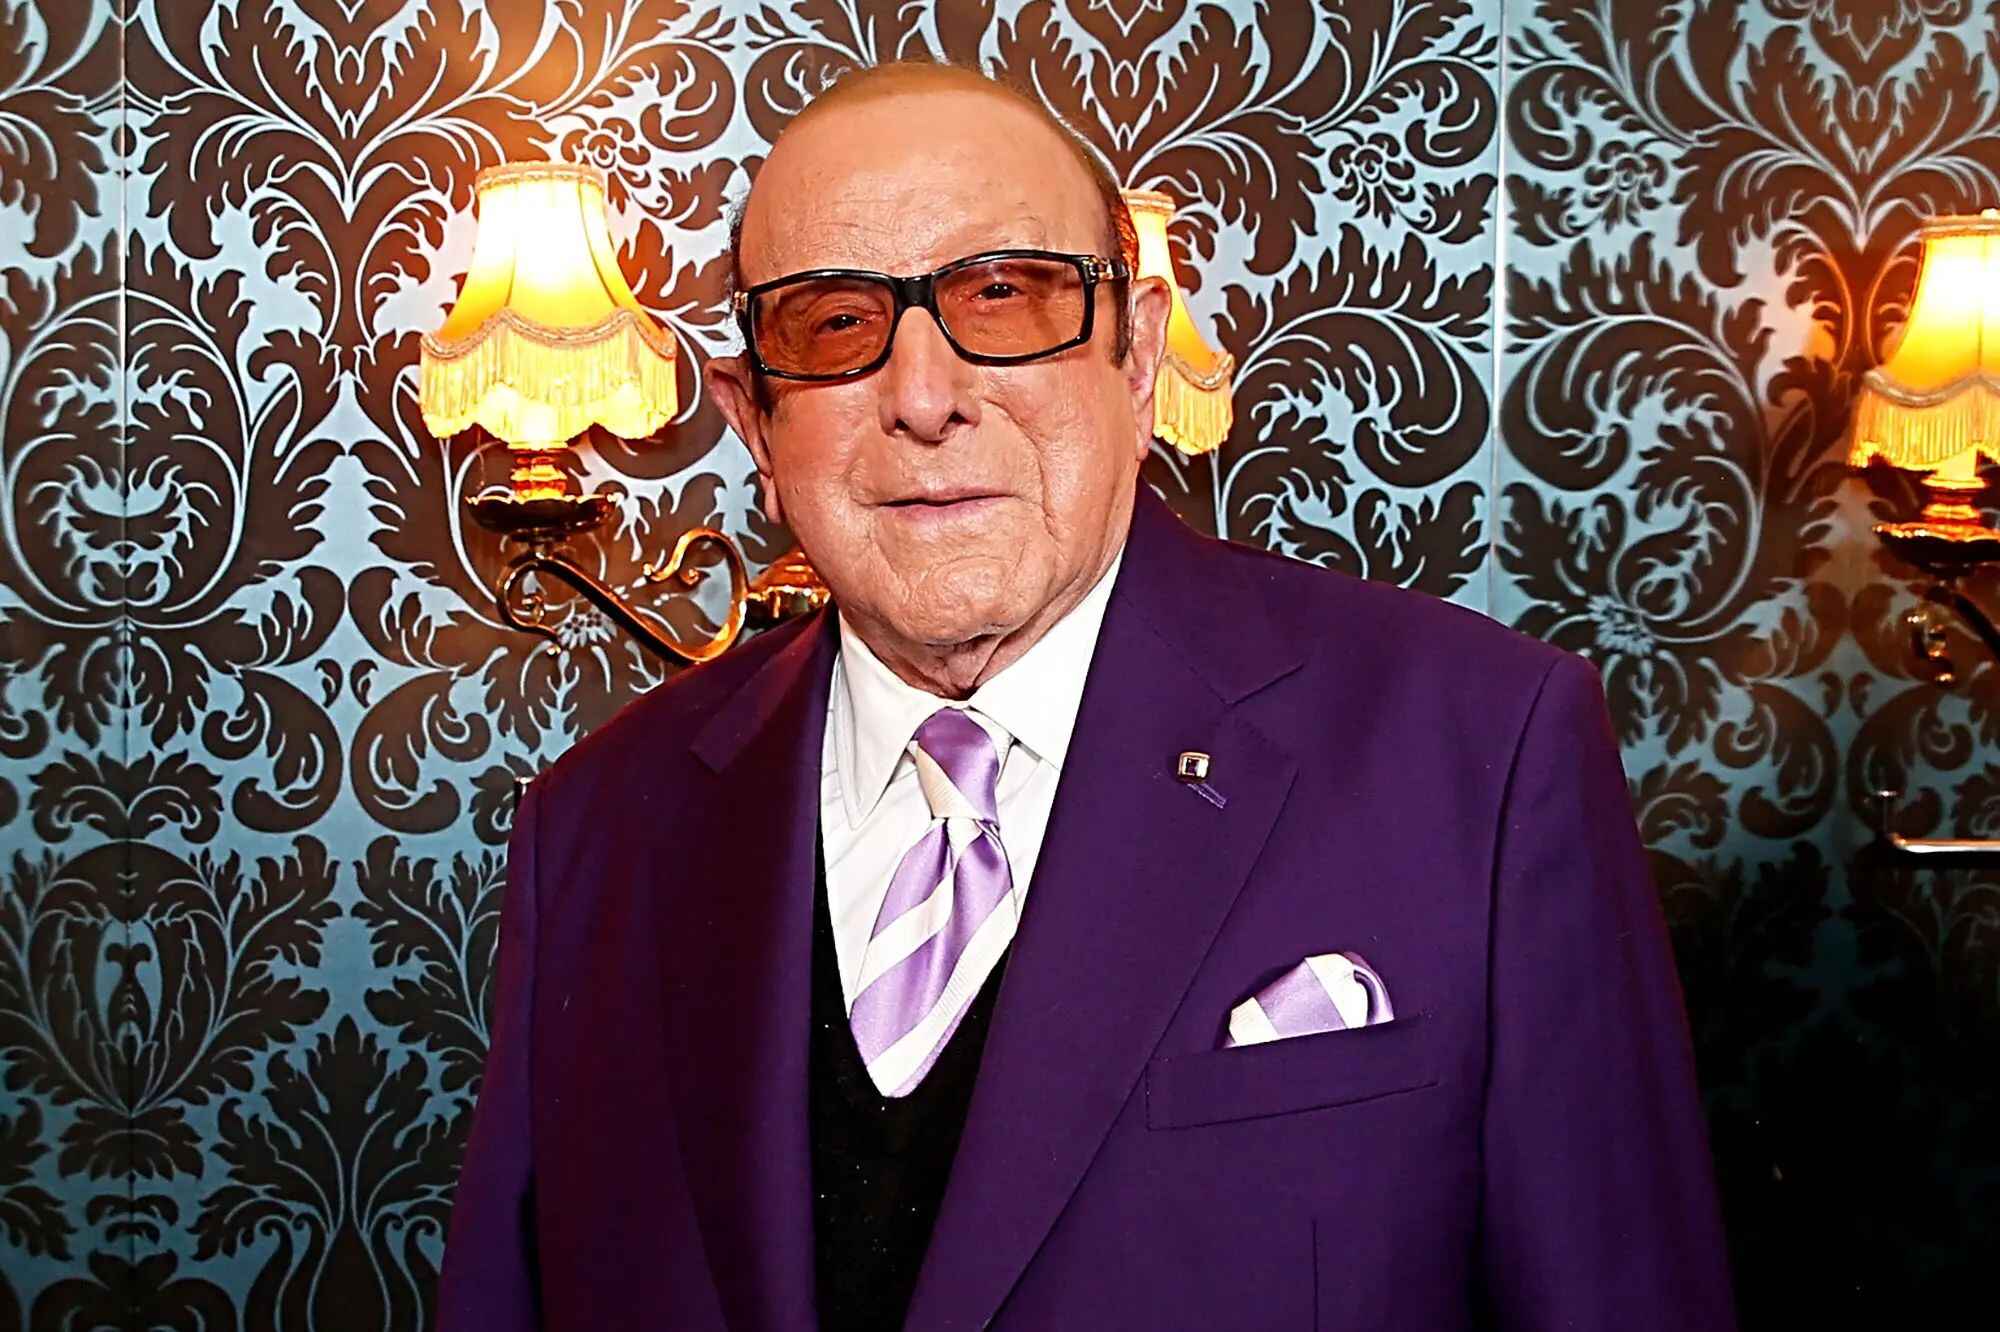 Armed Man Arrested Near Site Of Clive Davis Grammy Party